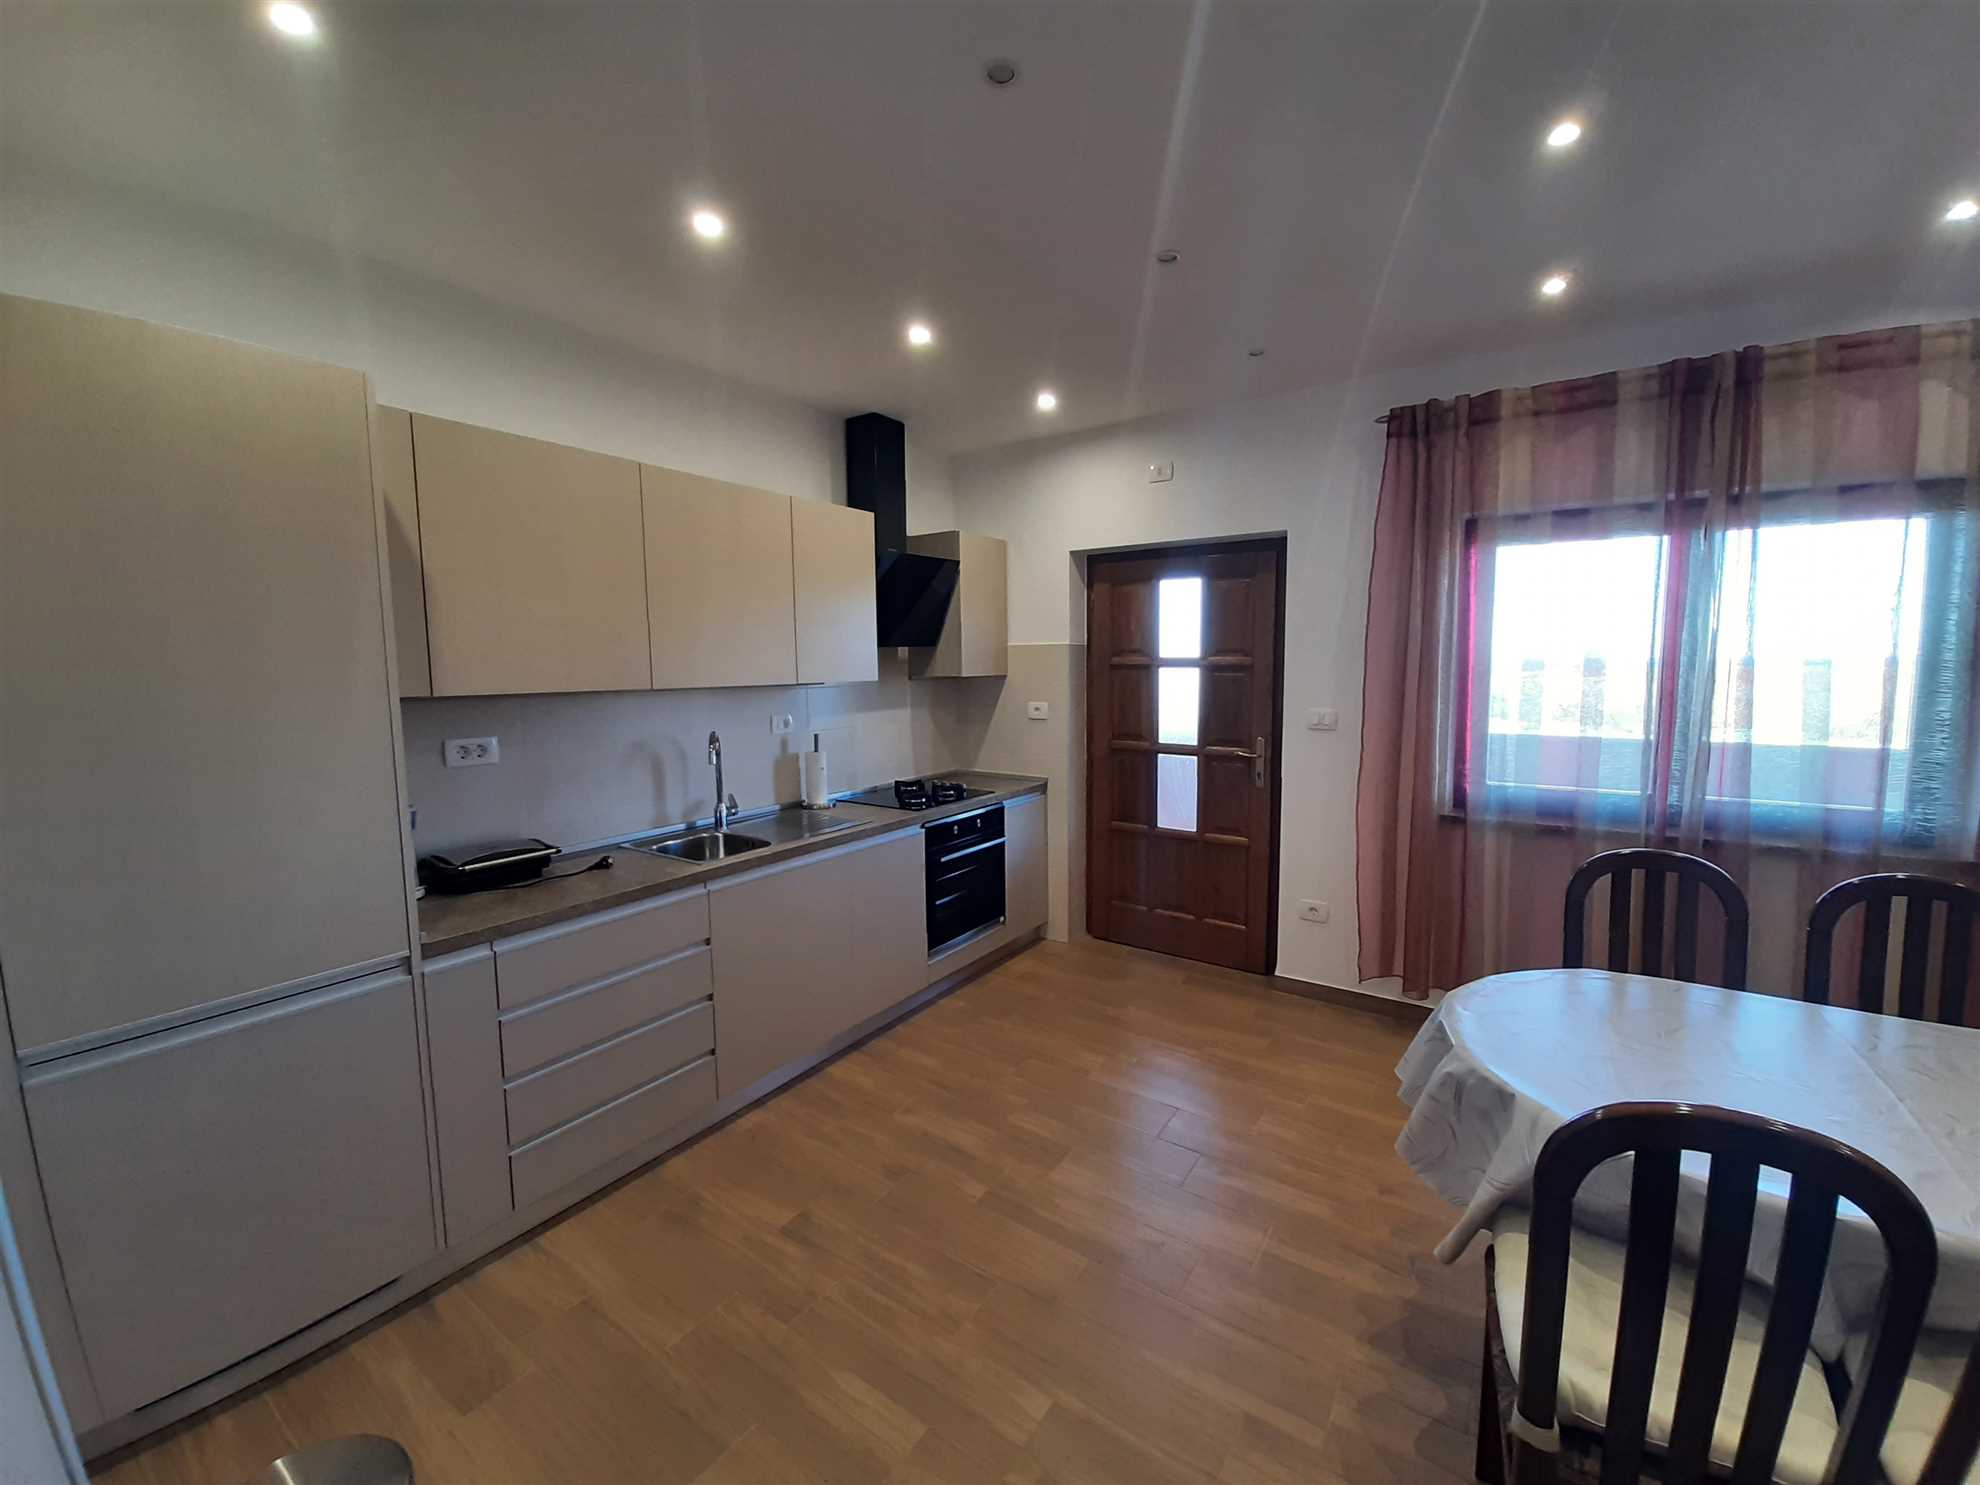 Image of Apartment Tre Pini 2 with one bedroom